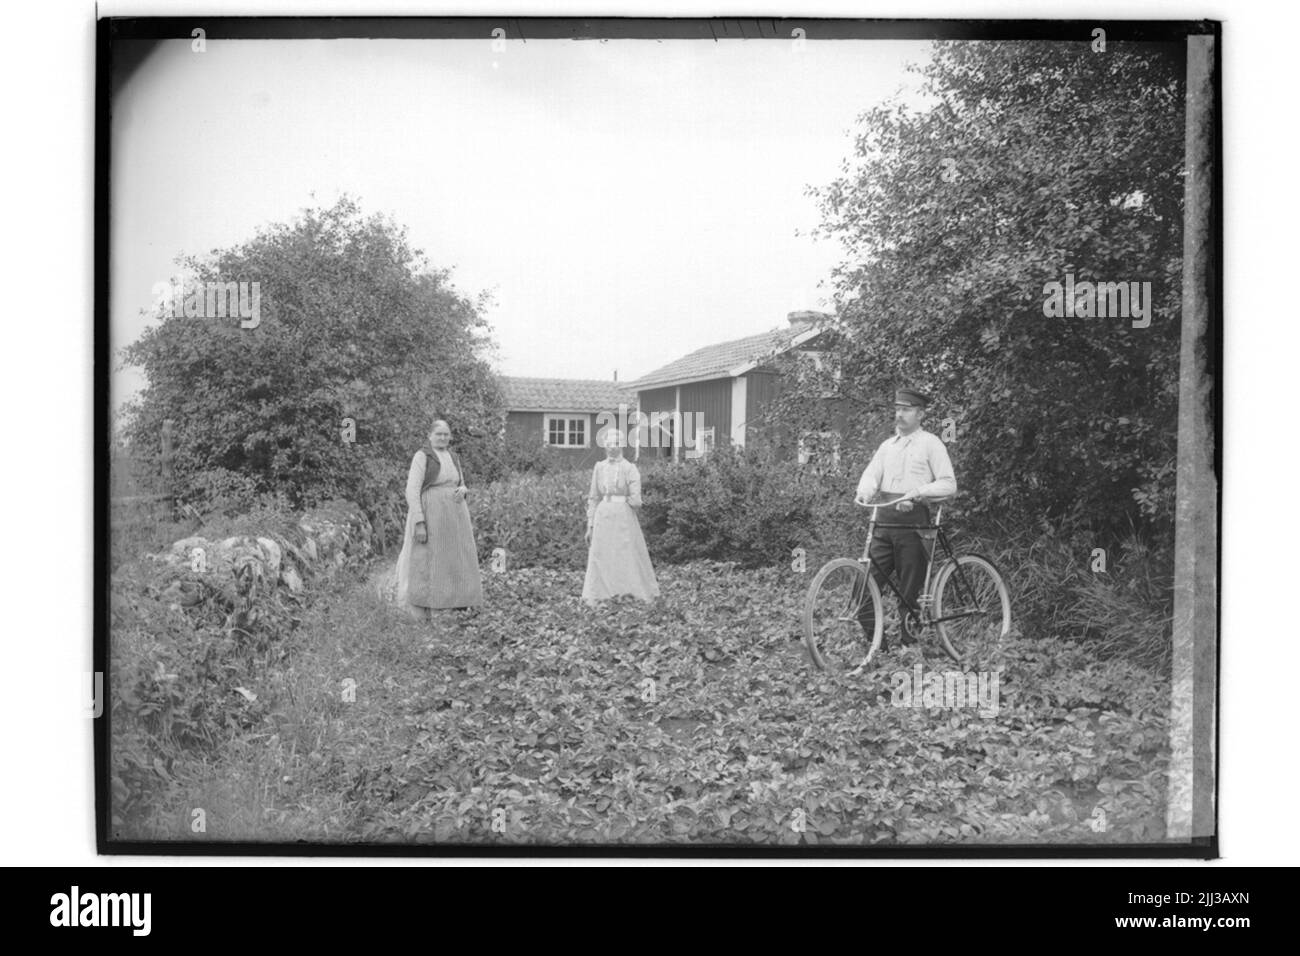 One -storey residential building and outbuildings, two women and a man with bicycle.Petrus Johansson Stock Photo